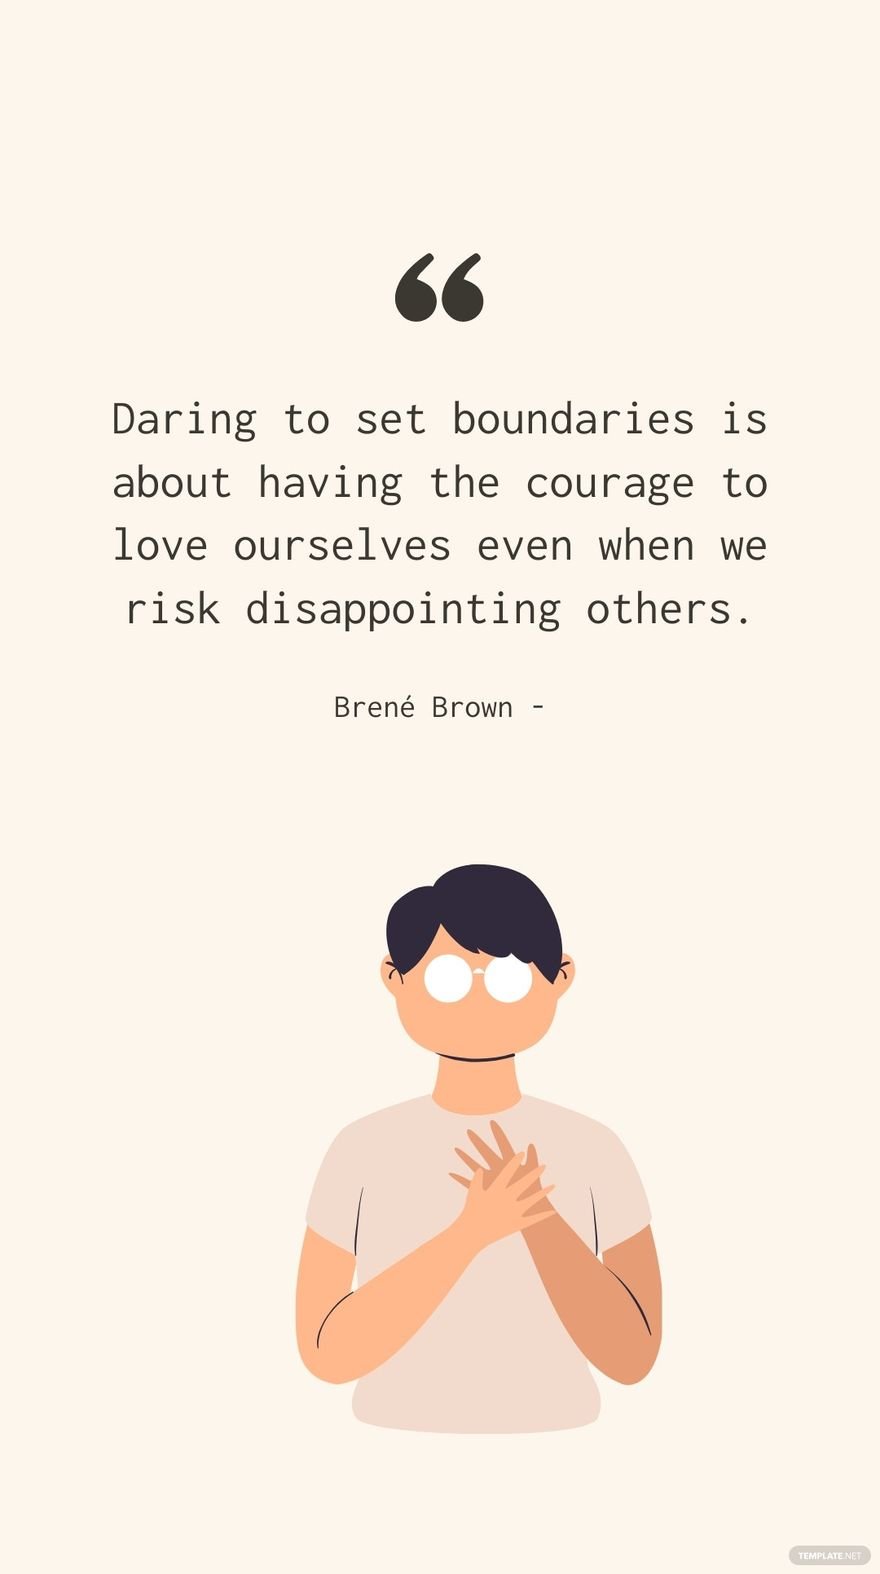 Brené Brown - Daring to set boundaries is about having the courage to love ourselves even when we risk disappointing others.